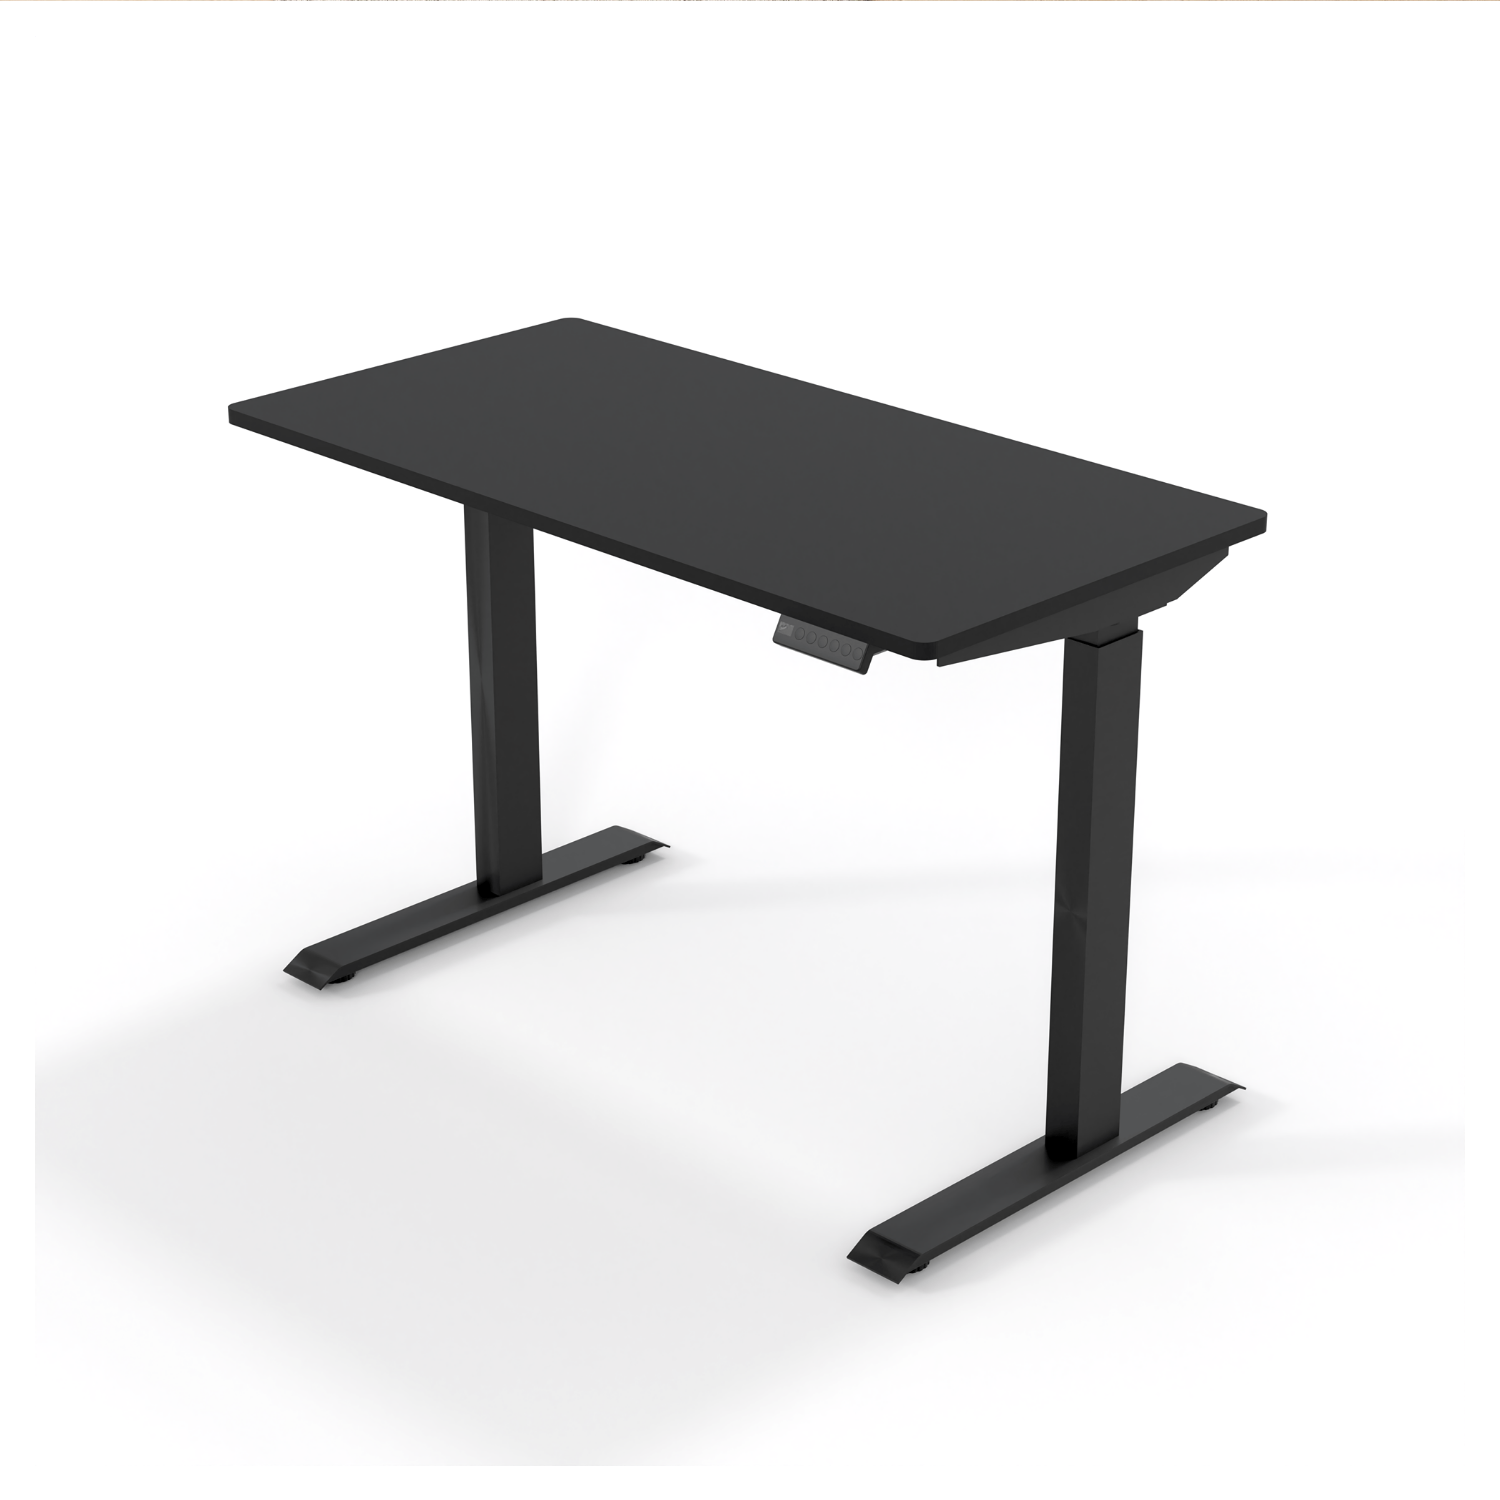 Wenhome Standing Desk Height Adjustable, Rise desk, 10 Minutes Assembly, 47.2"x23.6" One Piece Desktop Included, Anti-collision, Black, Free Shipping